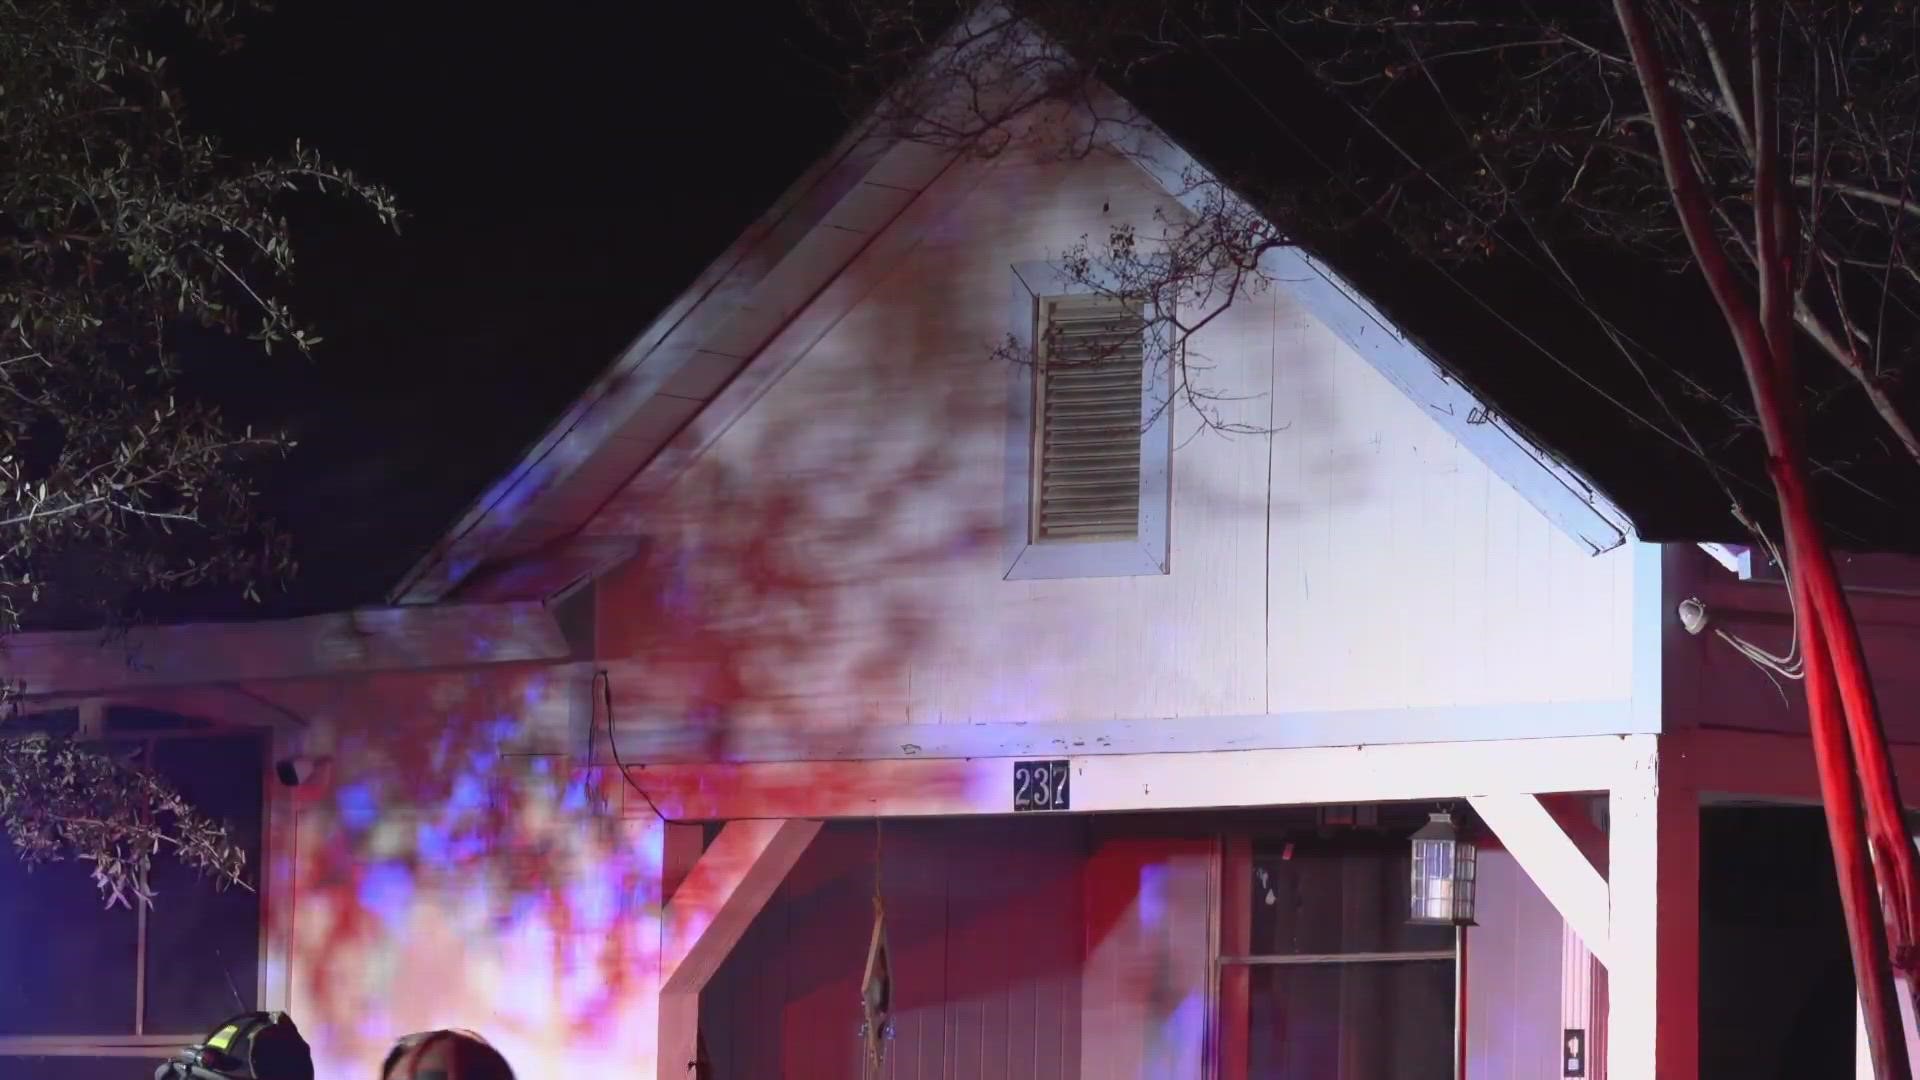 The fire heavily damaged the rear of the home, according to SAFD.